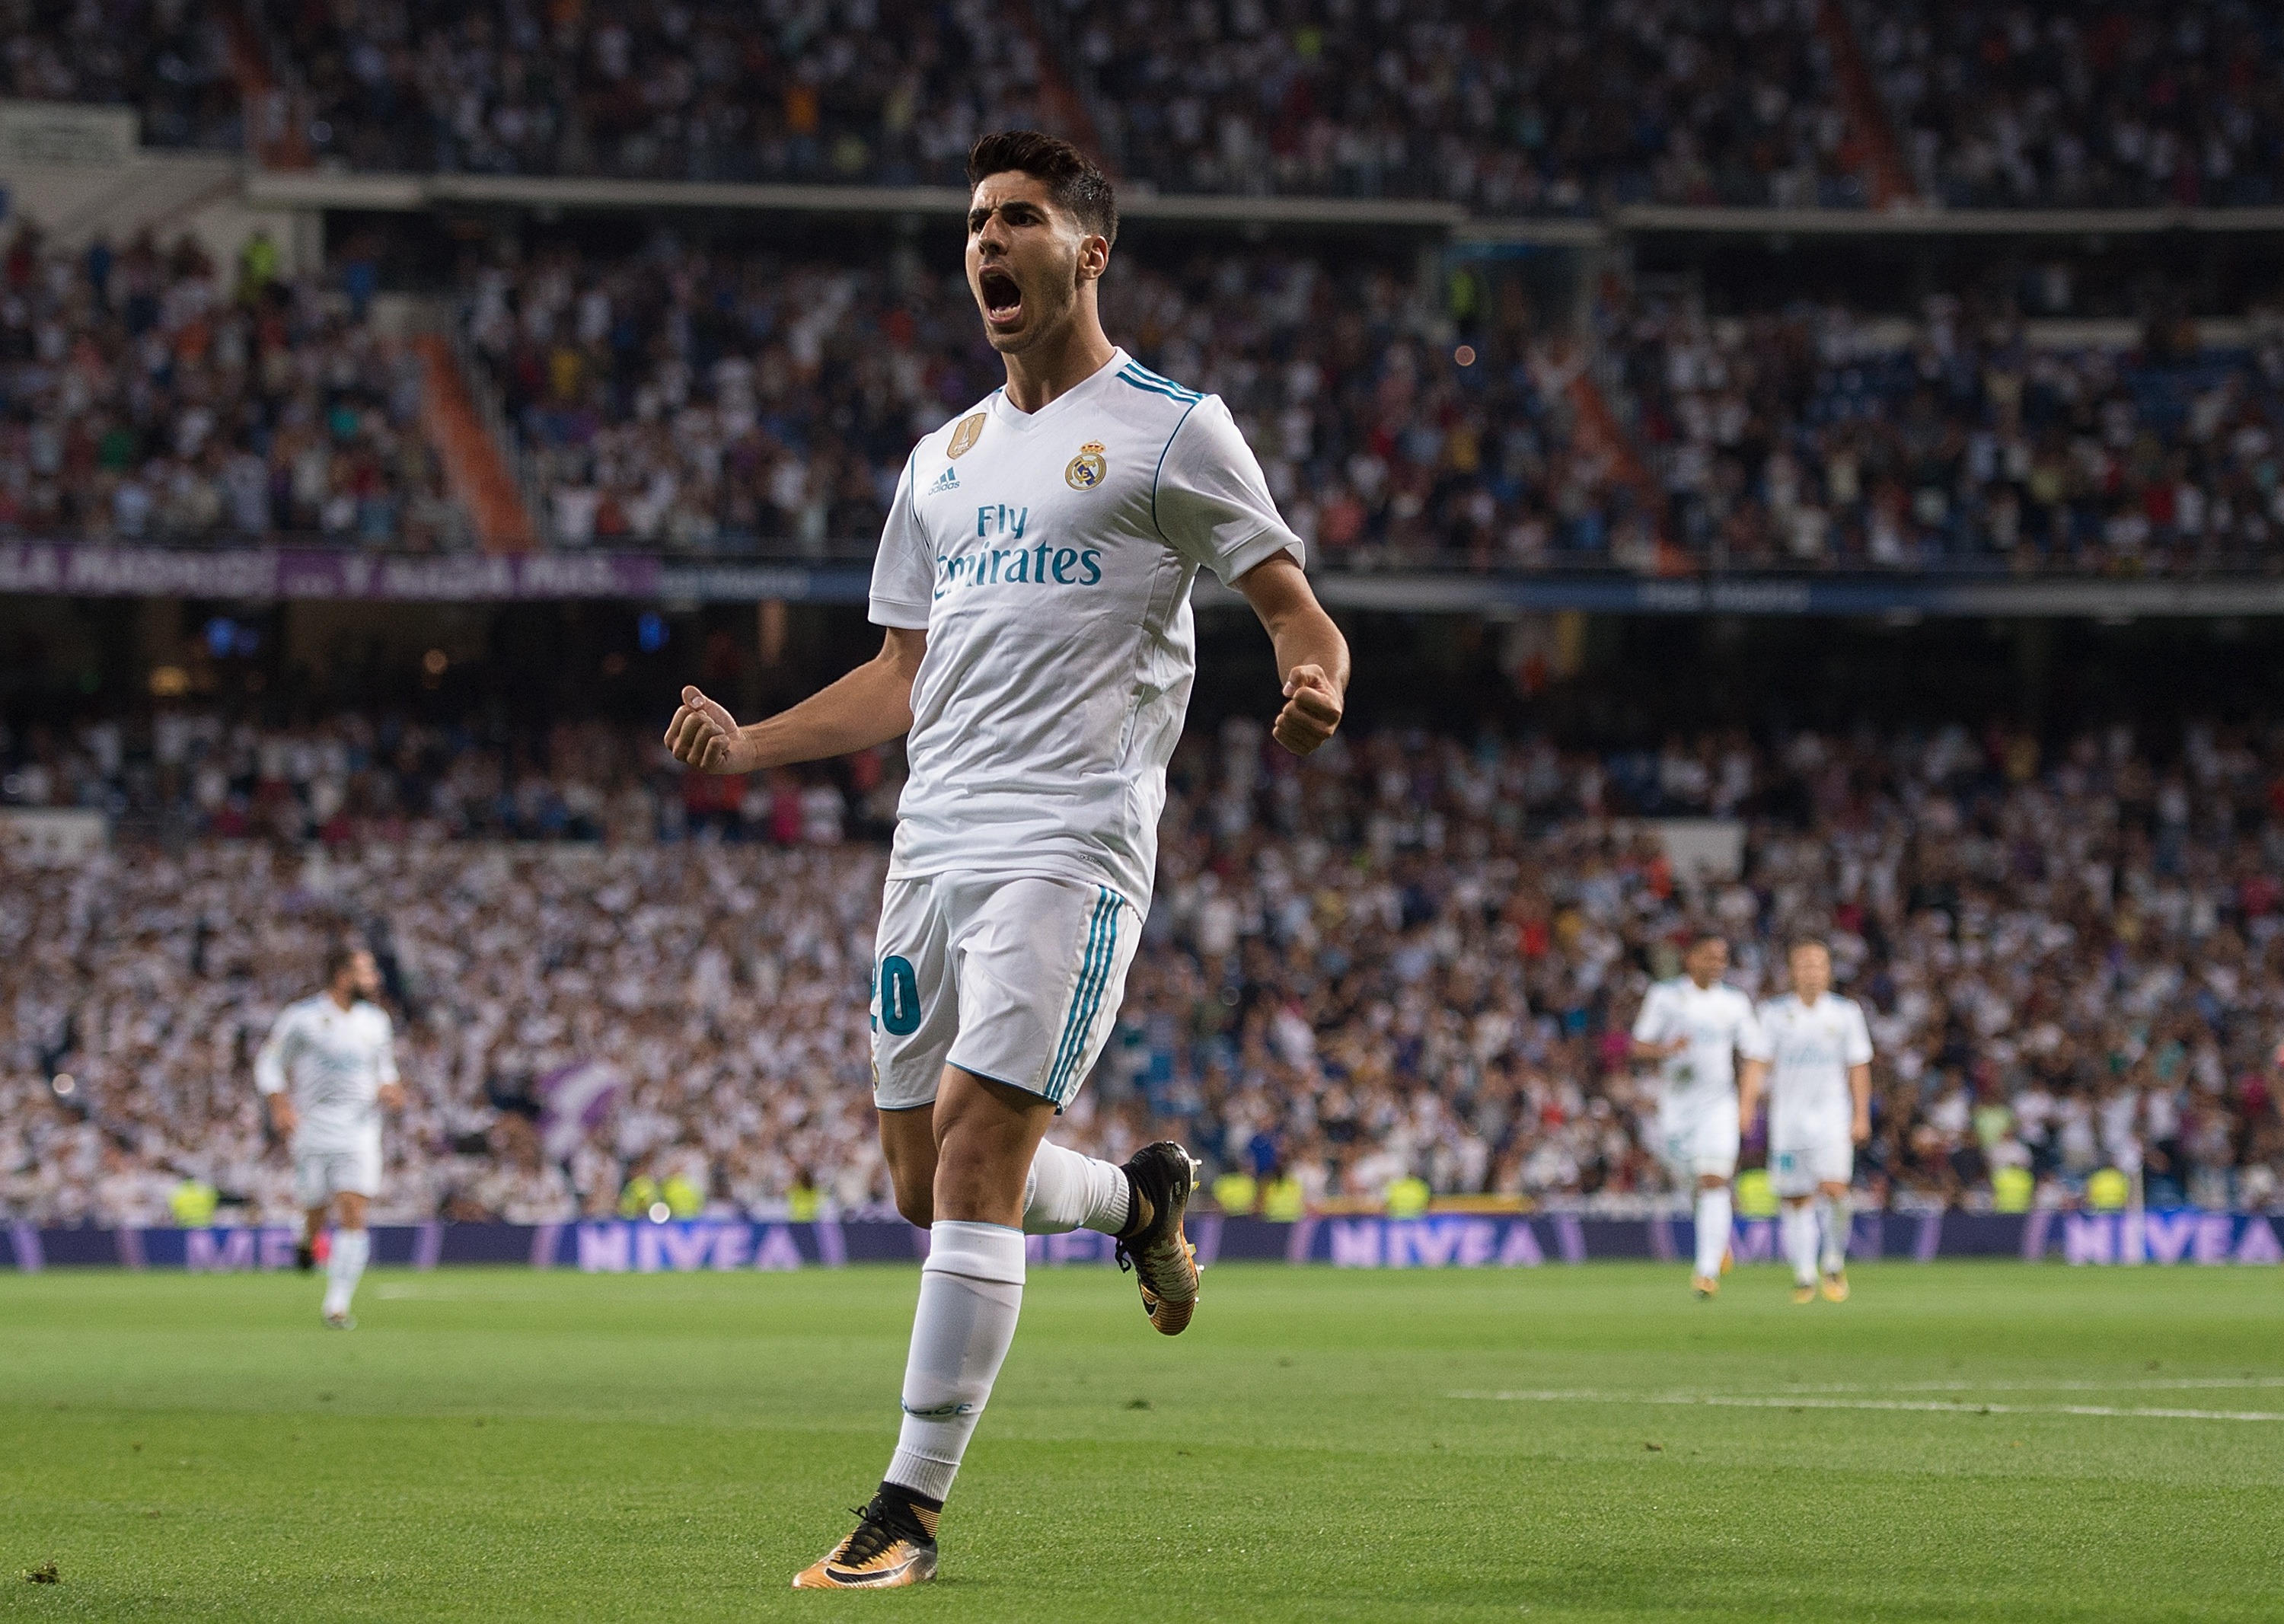 MADRID, SPAIN - AUGUST 27: Marco Asensio of Real Madrid CF celebrates after scoring his teamÕs 1st goal during the La Liga match between Real Madrid CF and Valencia CF at Estadio Santiago Bernabeu on August 27, 2017 in Madrid, Spain . (Photo by Denis Doyle/Getty Images)